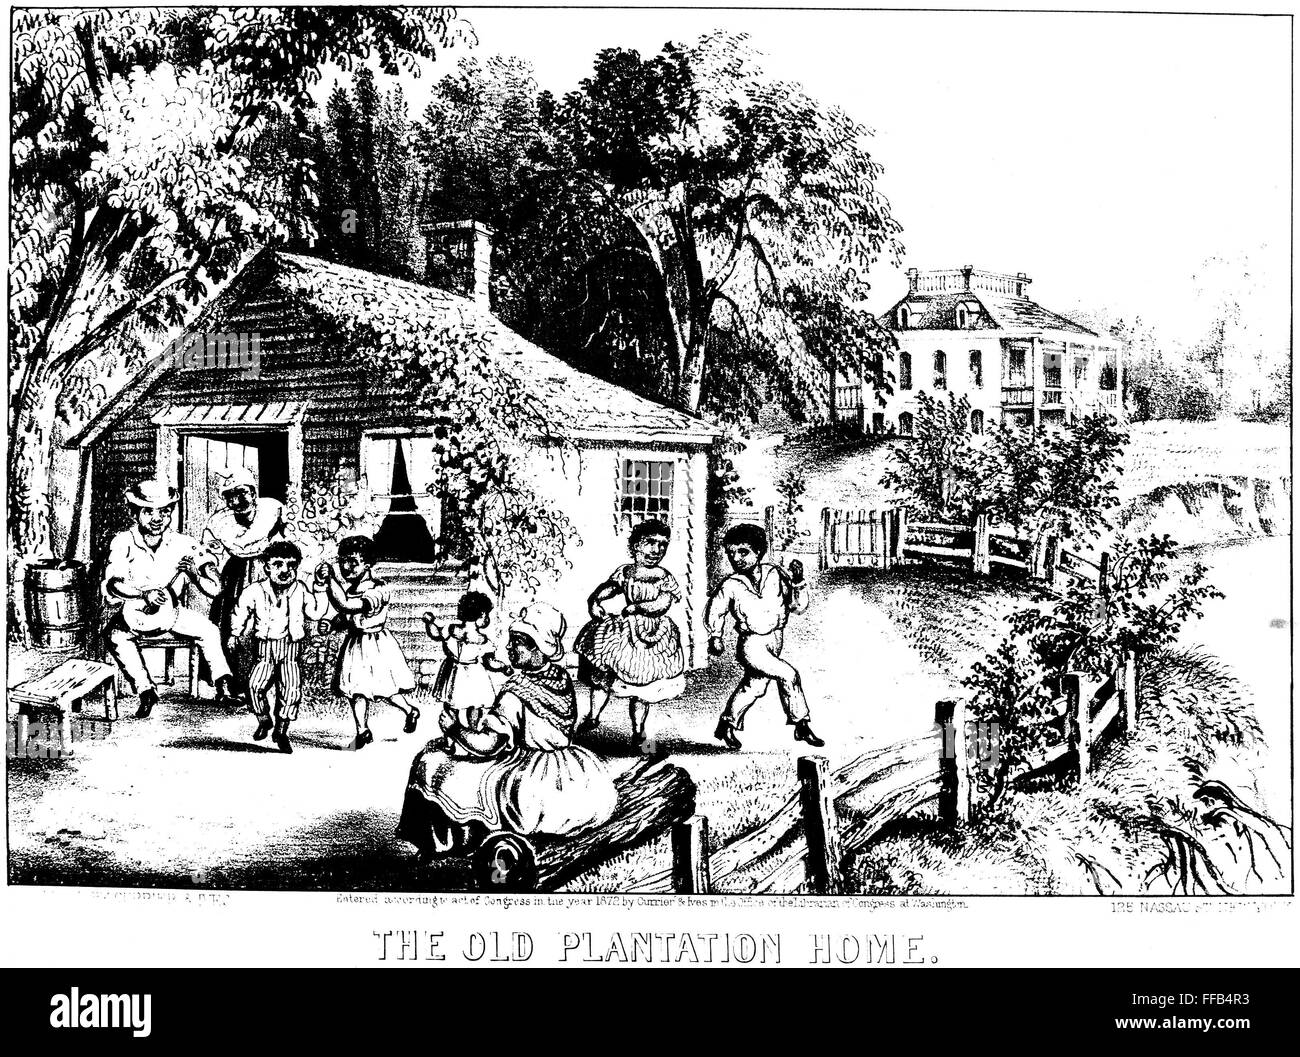 SLAVERY: PLANTATION LIFE. /n'The Old Plantation Home.' Lithograph by Currier and Ives, 1872, depicting slave life before the Civil War in the American South. Stock Photo